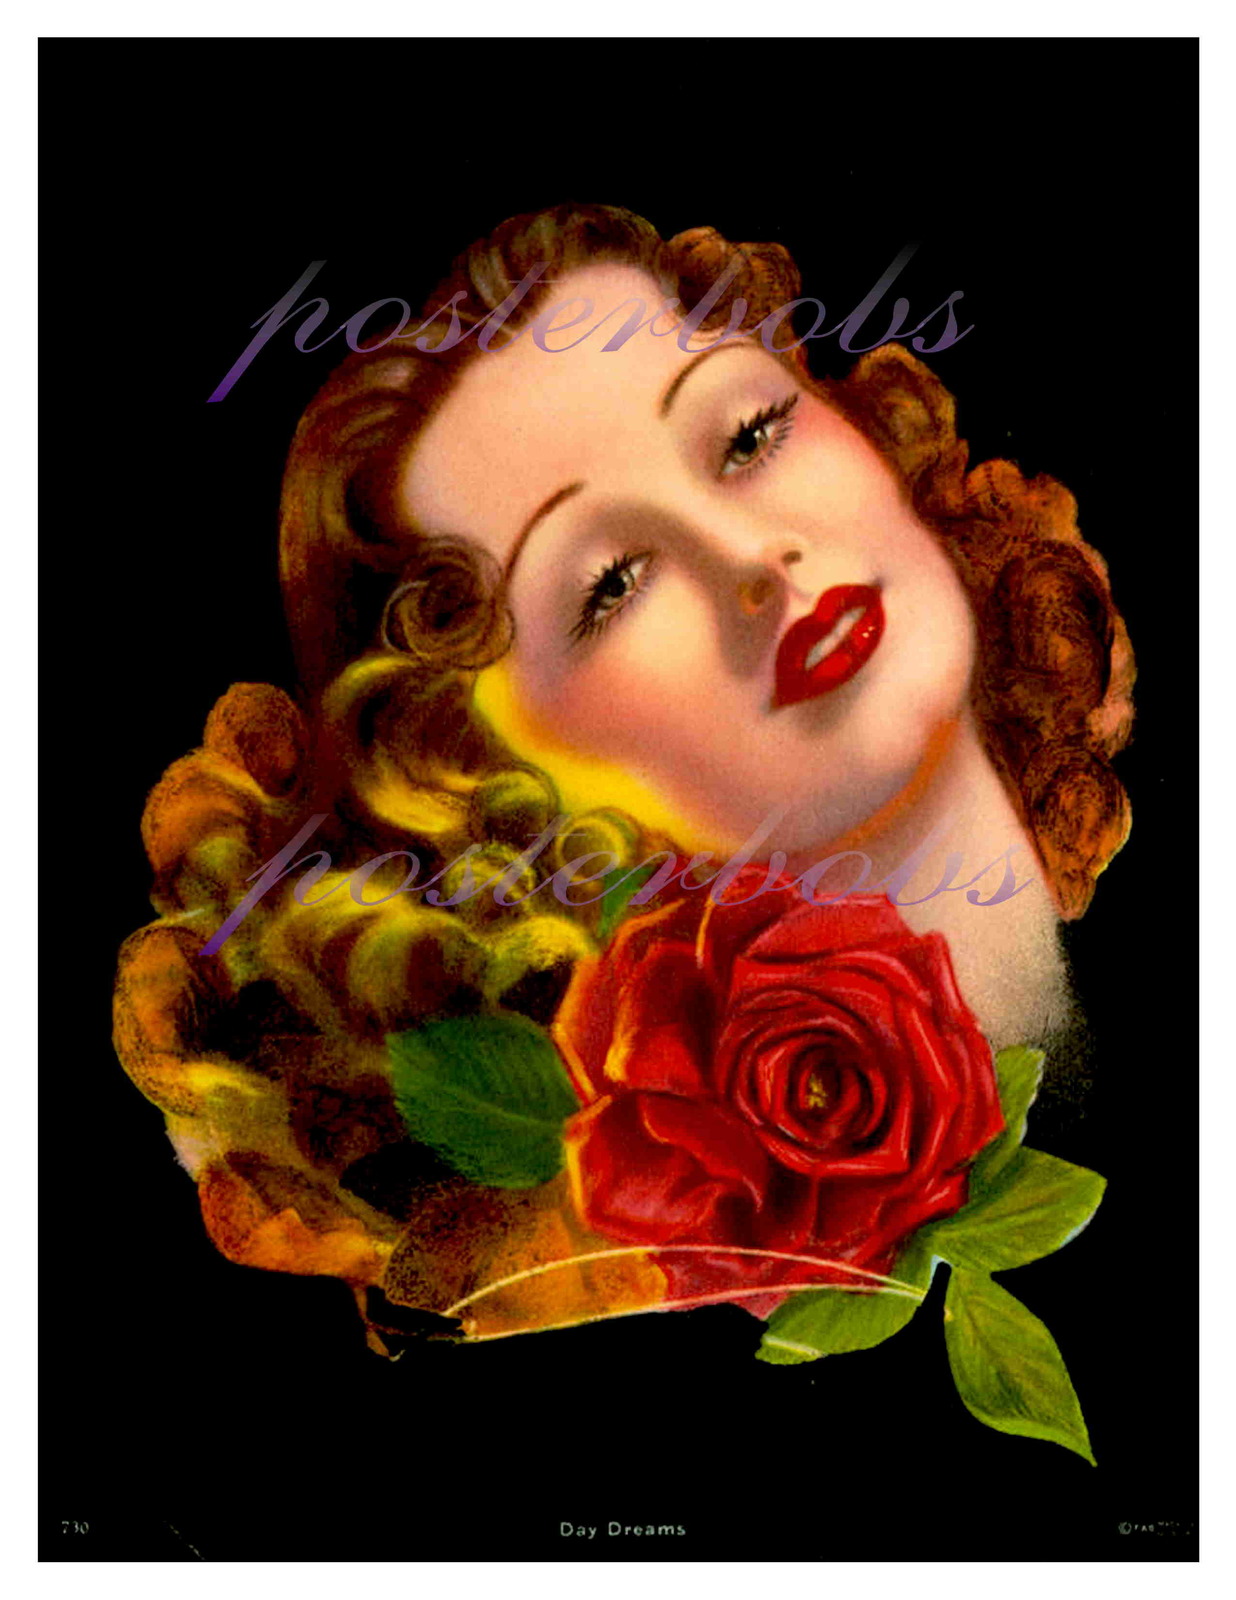 "Day Dreams", Vintage Art Deco Flapper Pin-Up Beauty 17 x 22 Canvas Giclee Print - $95.00